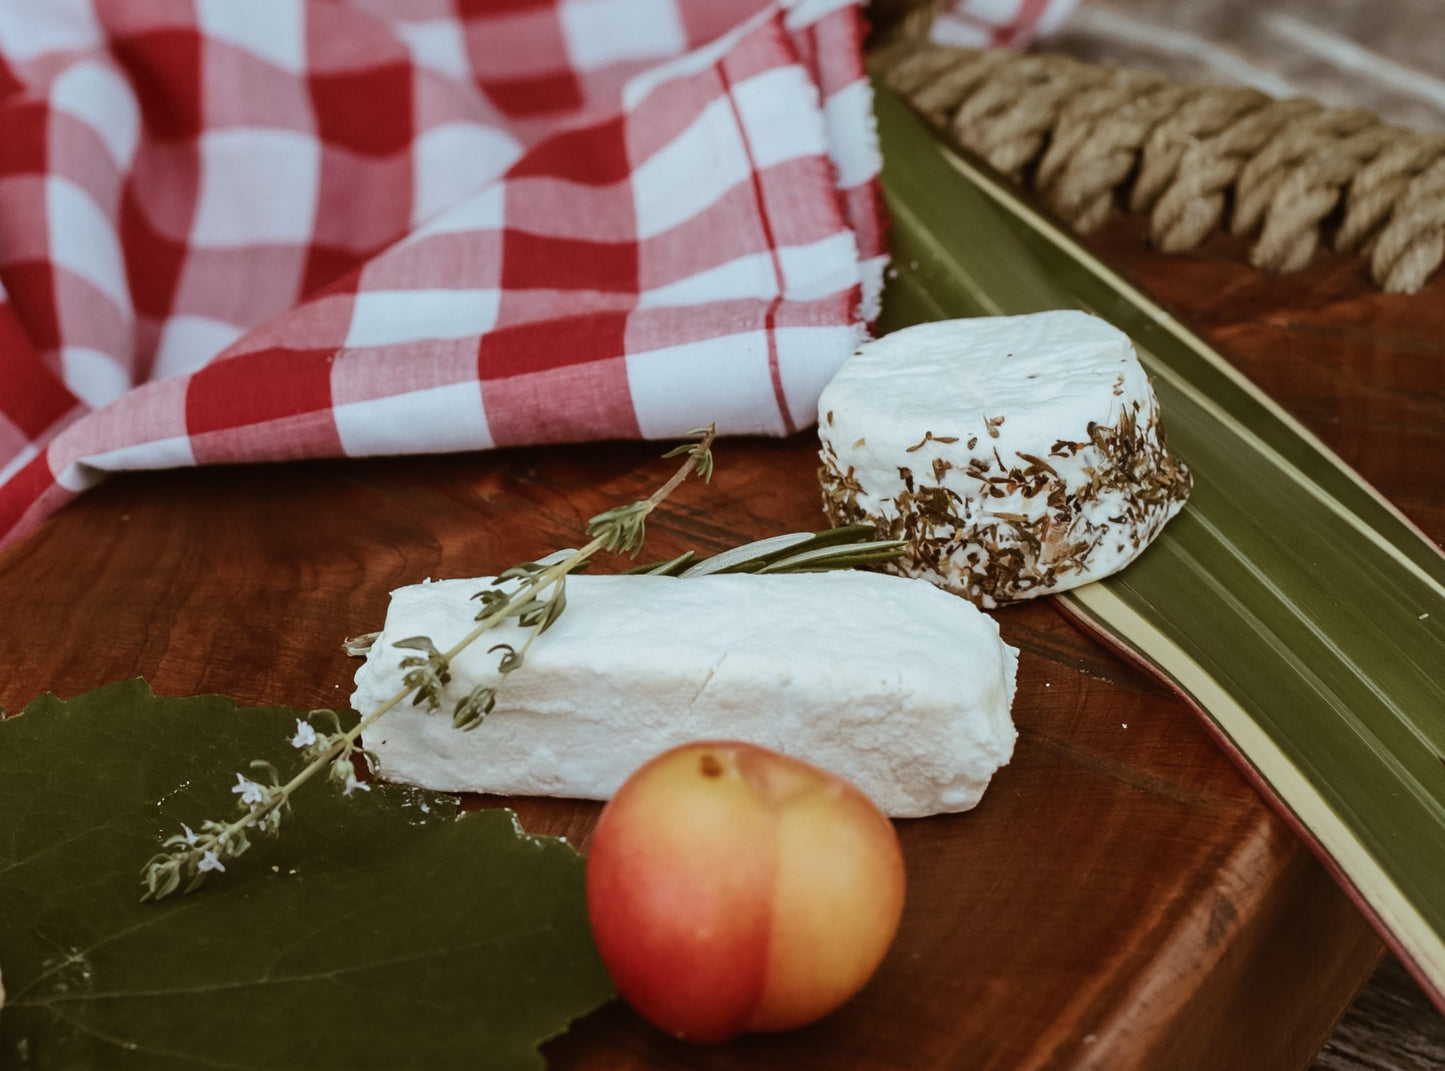 Provencal - Soft Goat Cheese